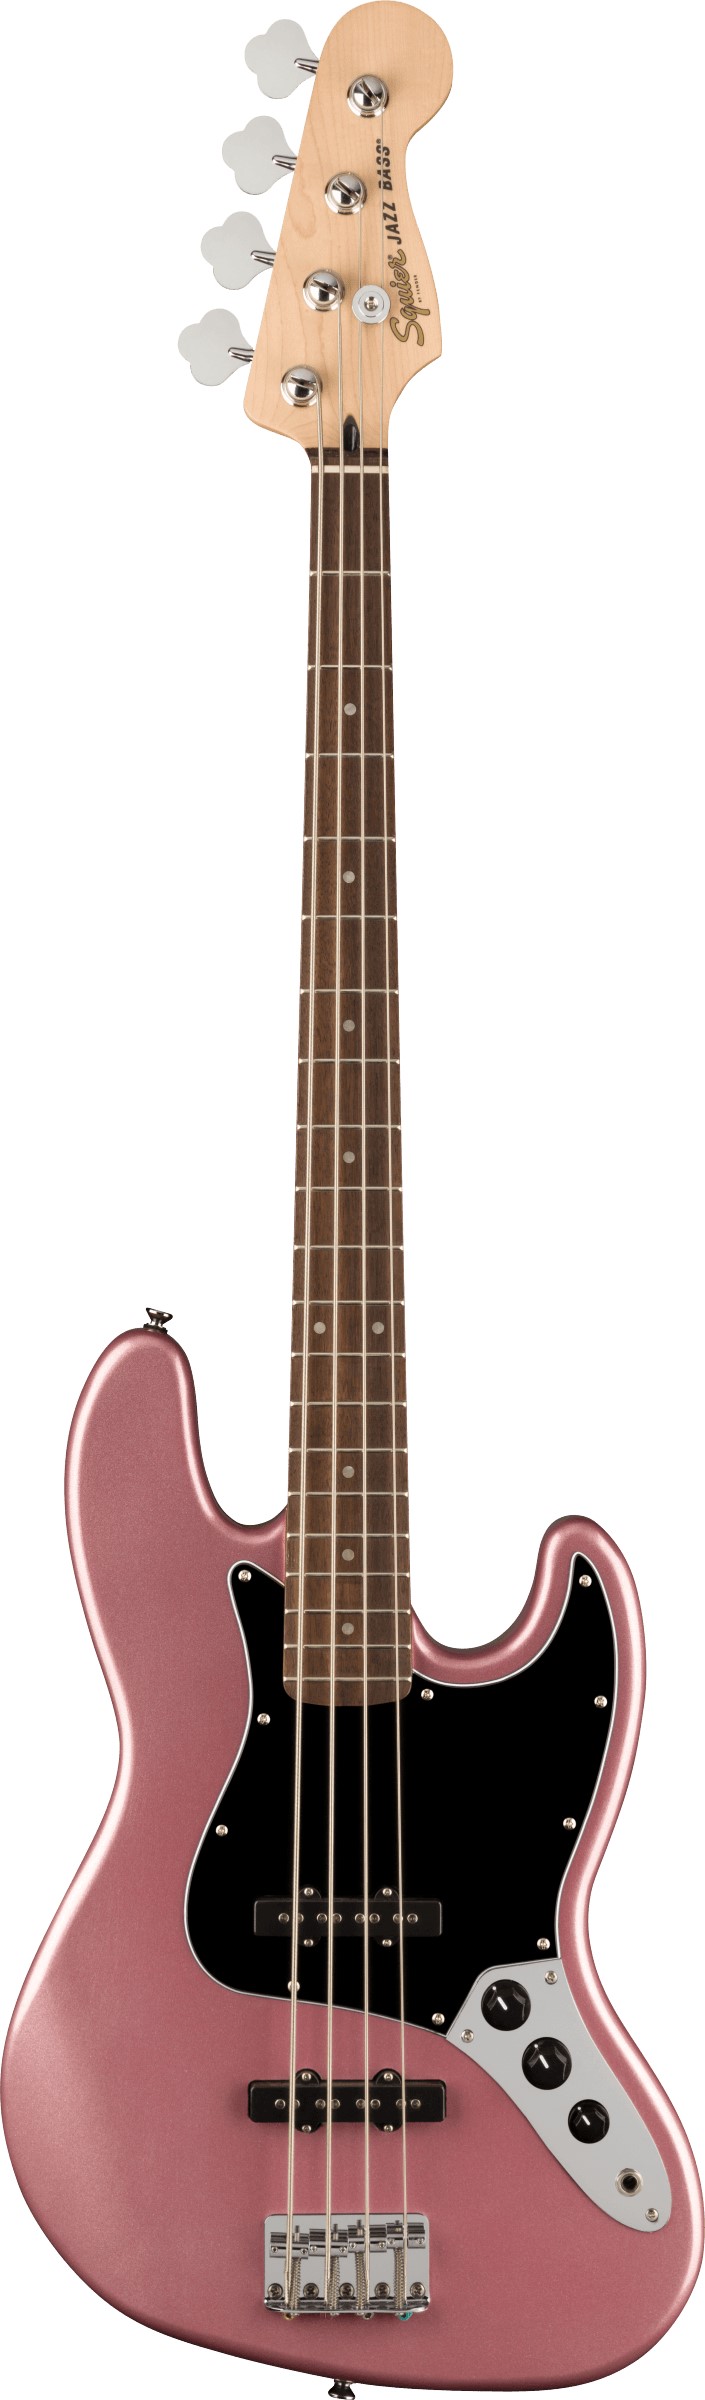 Squier Affinity Jazz Bass - GigGear